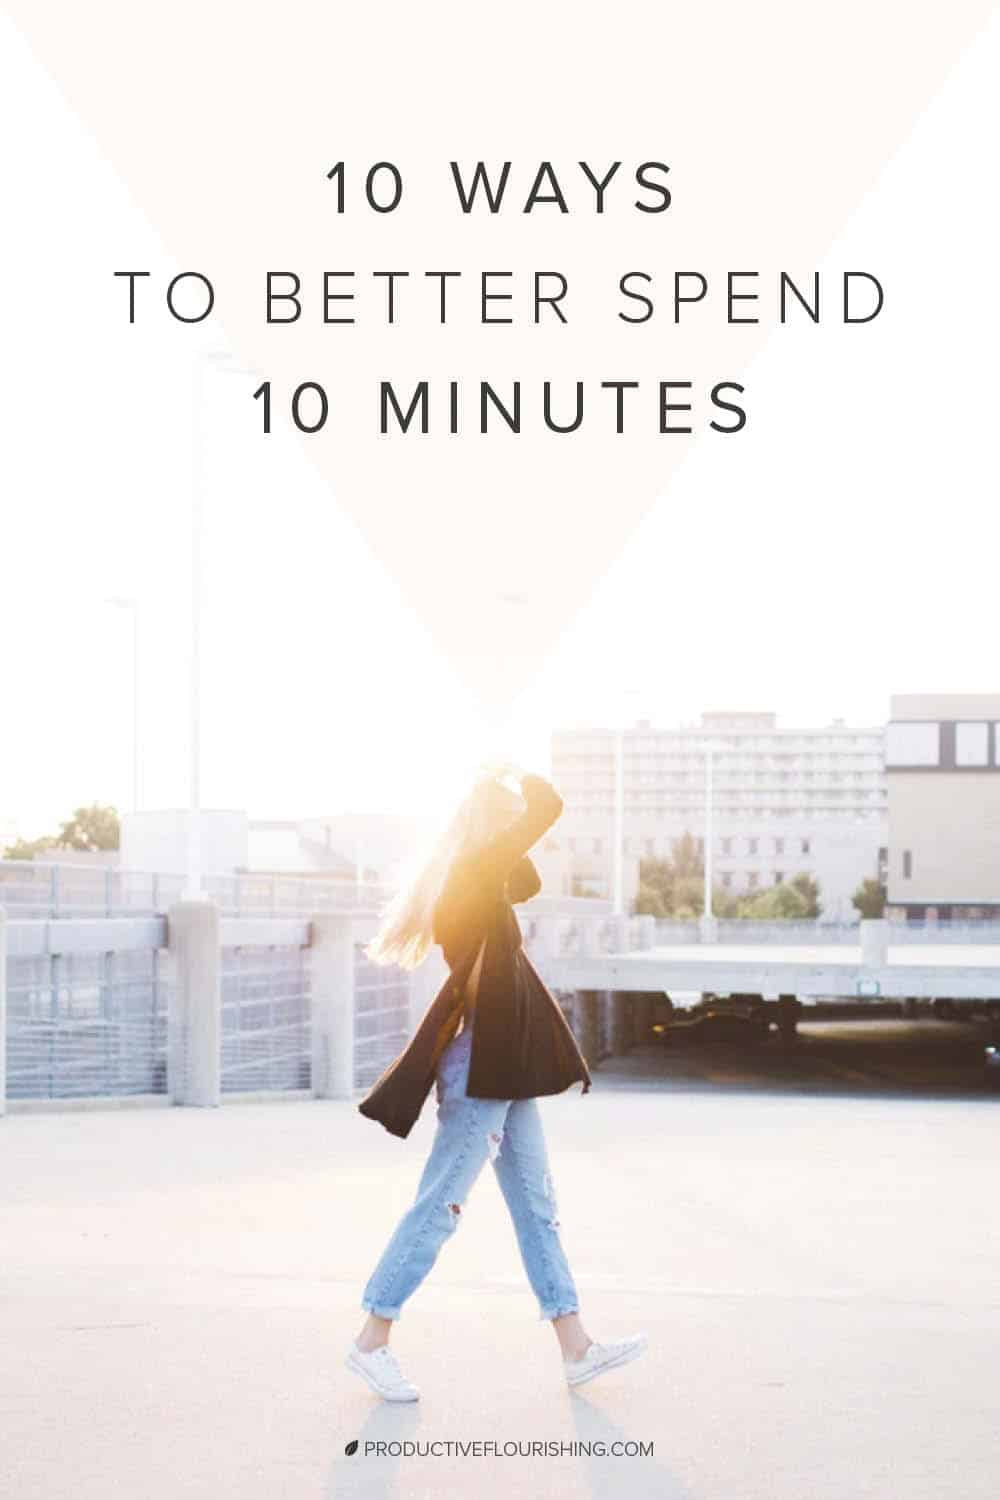 Here are 10 productive ways to spend 10 free minutes. When we have ten spare minutes, we often flip to Facebook, investigate Instagram, or putter off to see if the coffee’s finished brewing. However, we might put our free time to better use, using them to energize our small business productivity levels or reach unrealized entrepreneurship goals.  #timemanagement #entrepreneurshipgoals #productiveflourishing 